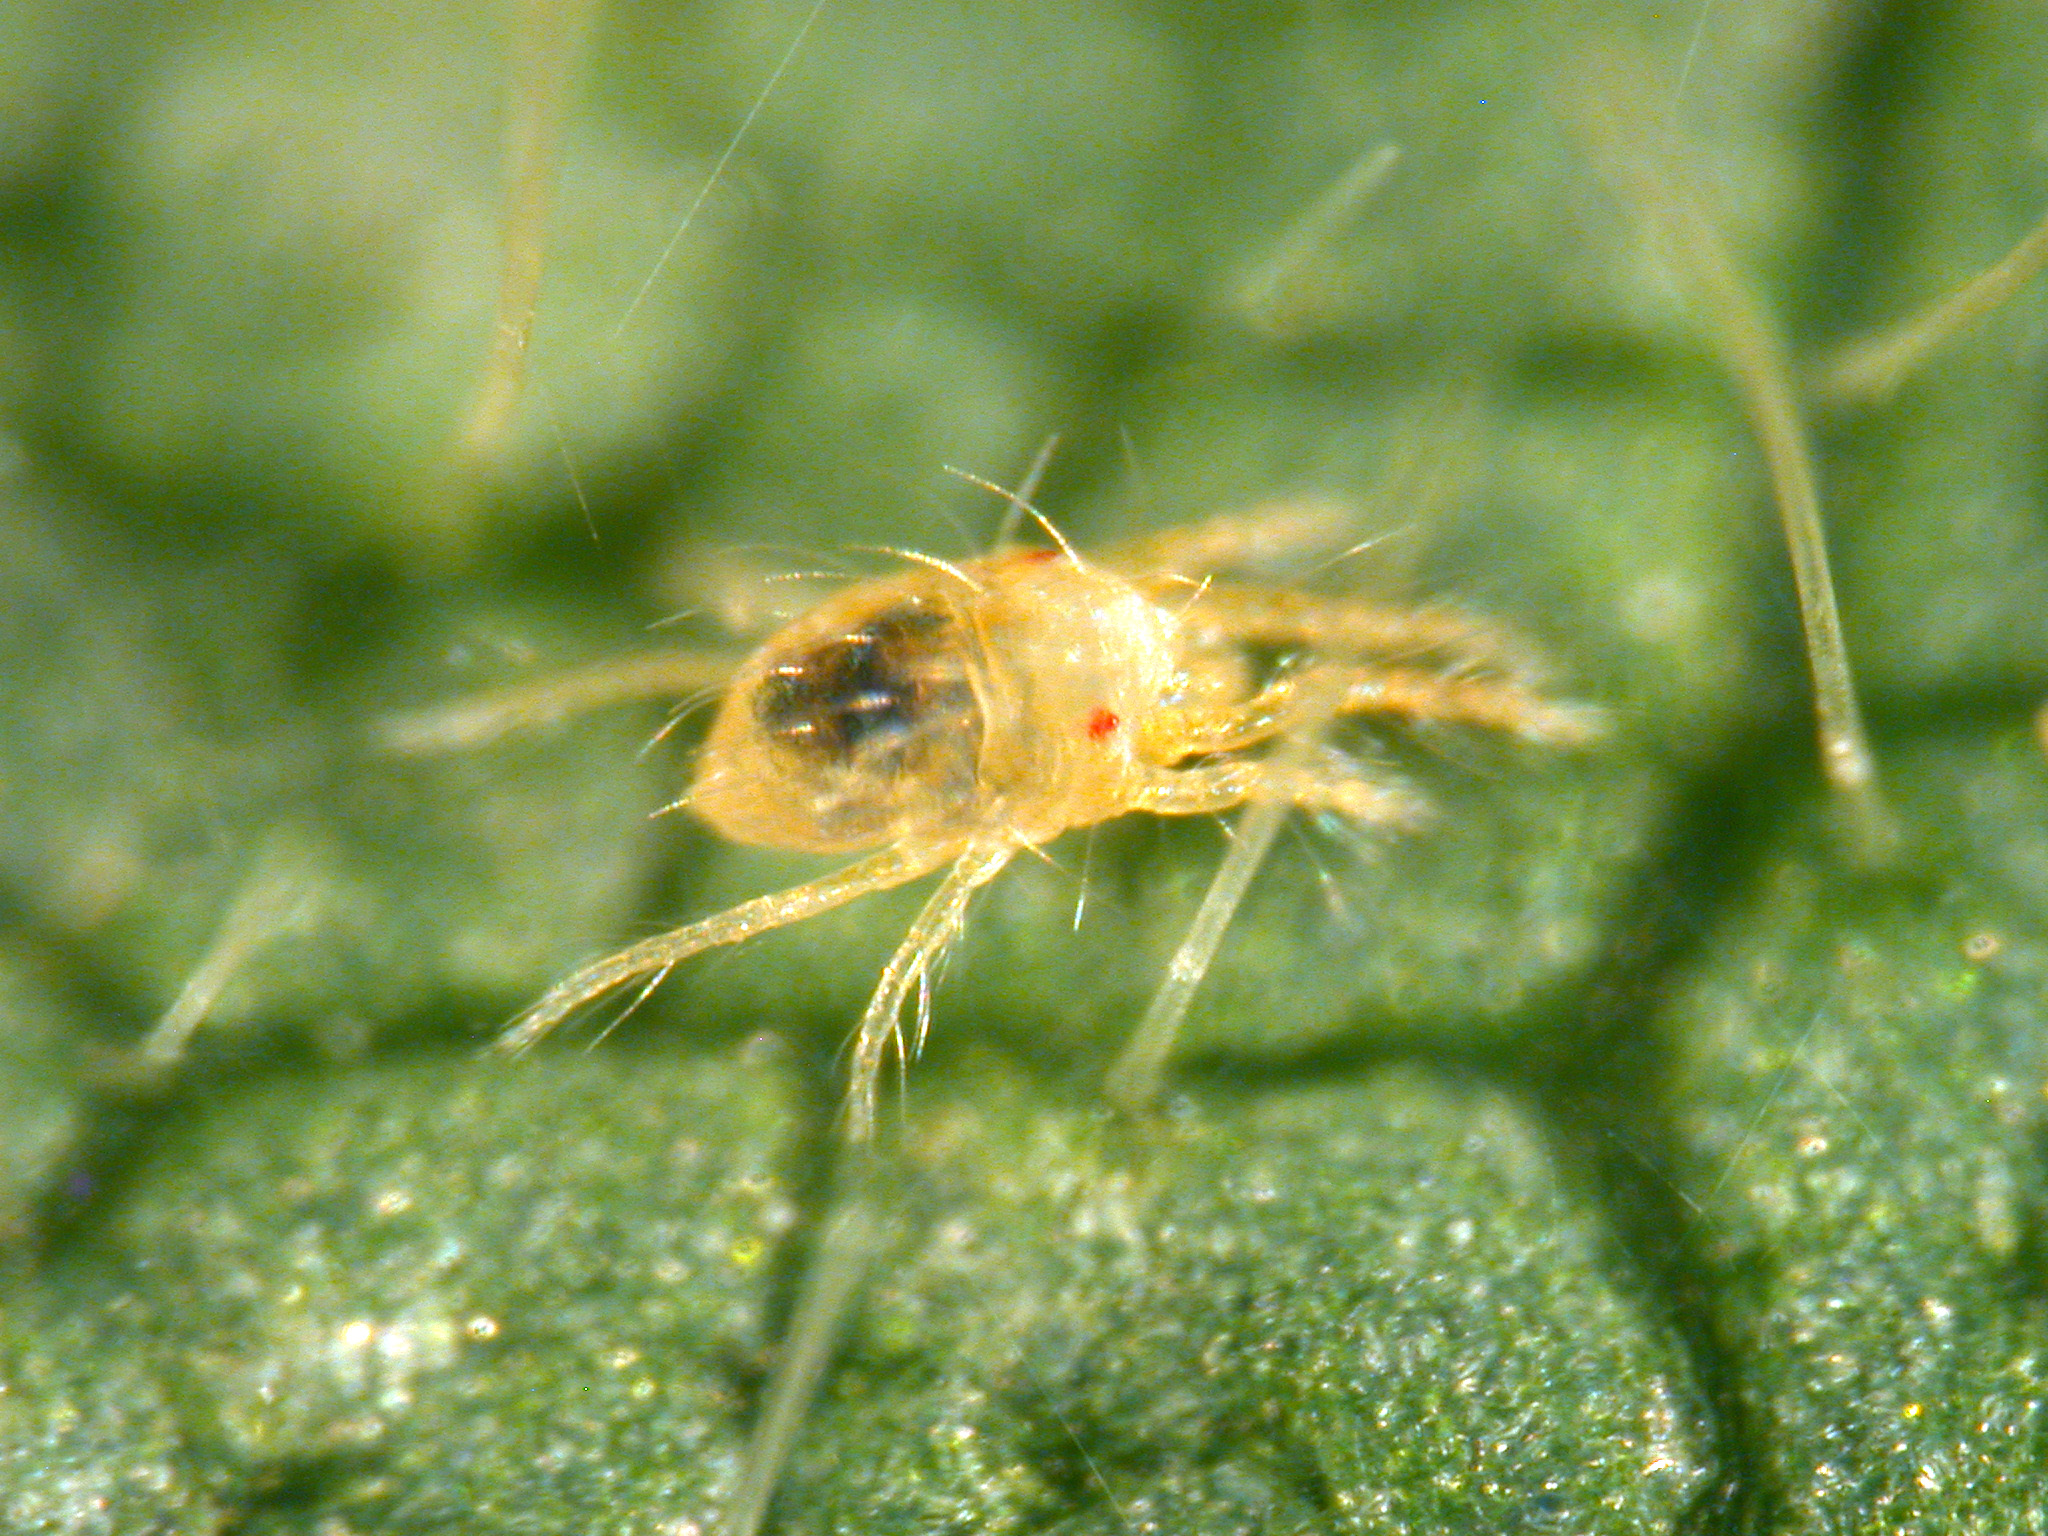 two-spotted spider mite